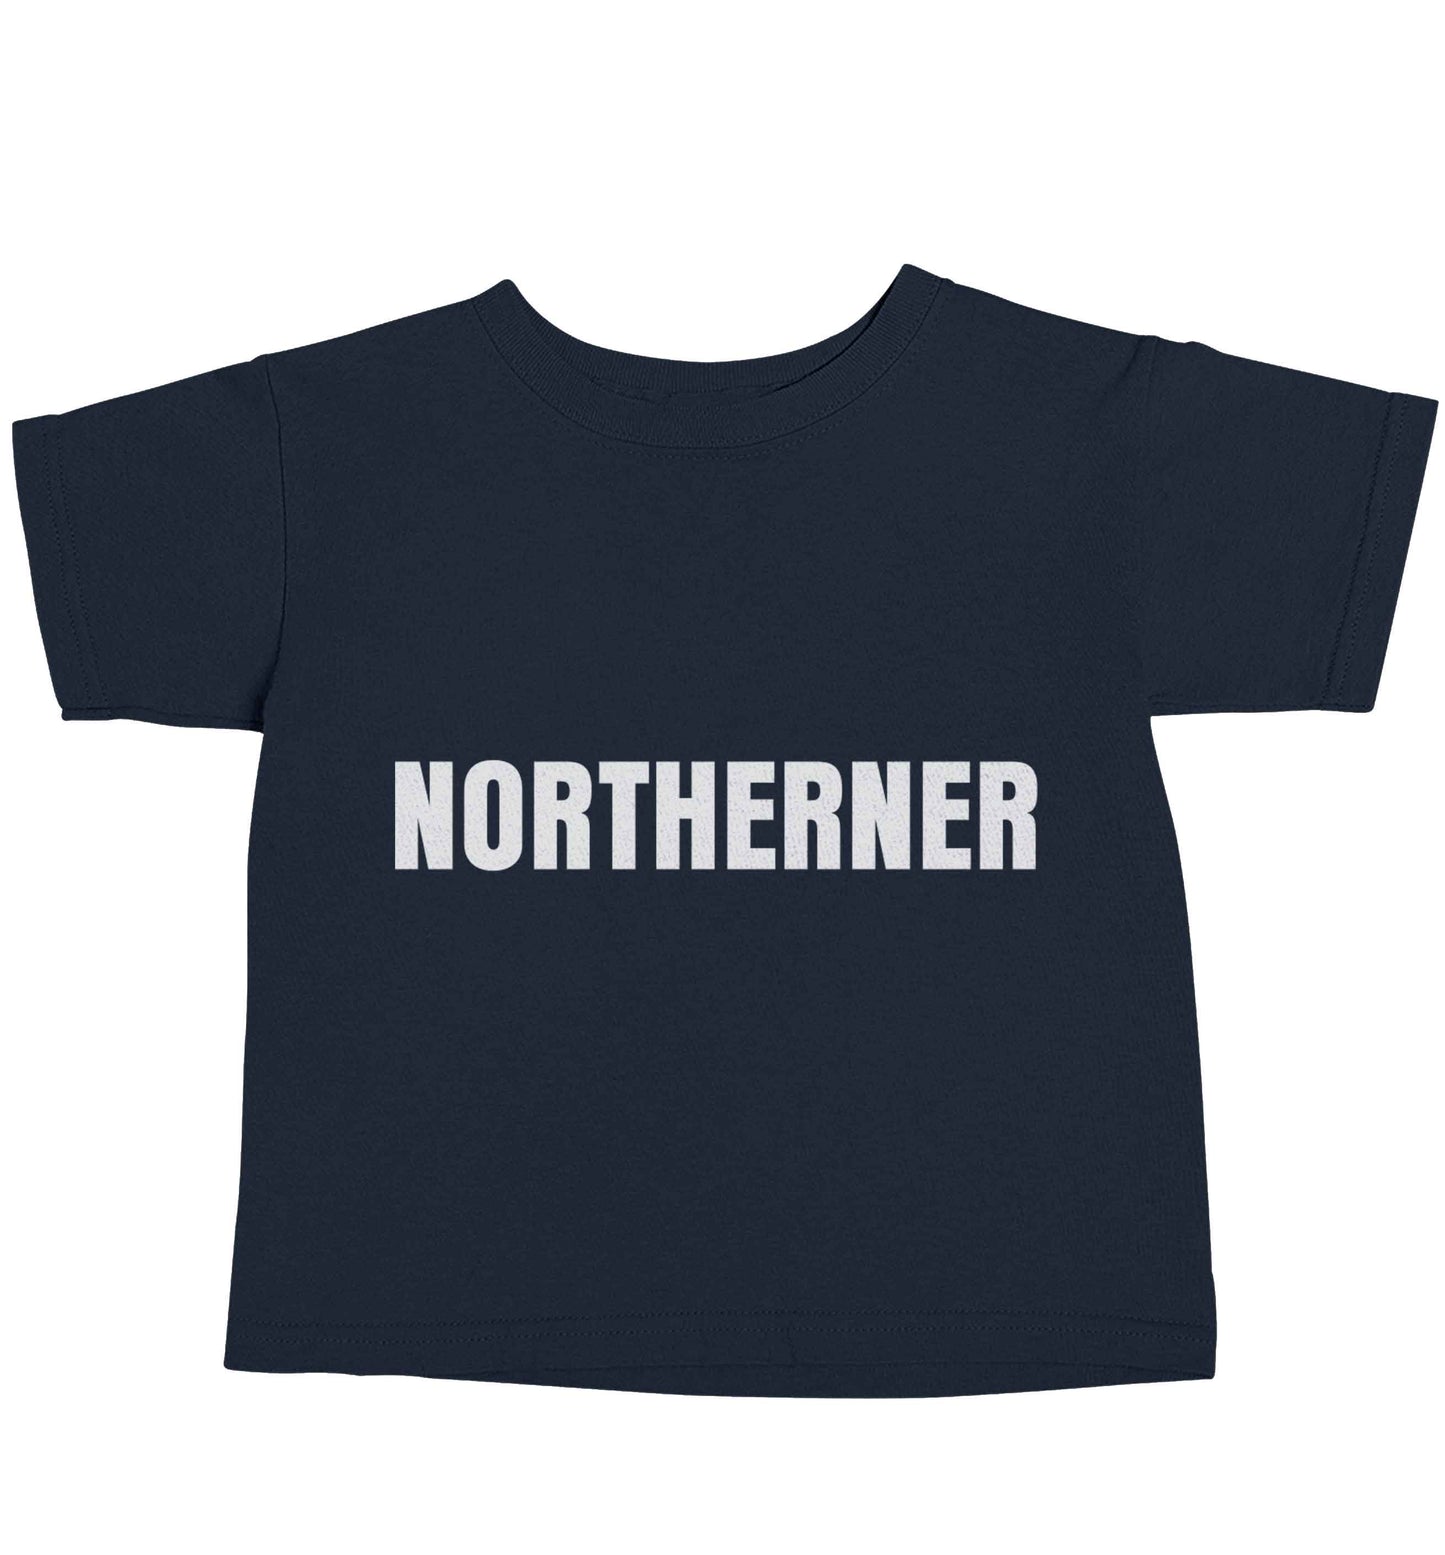 Northerner navy baby toddler Tshirt 2 Years